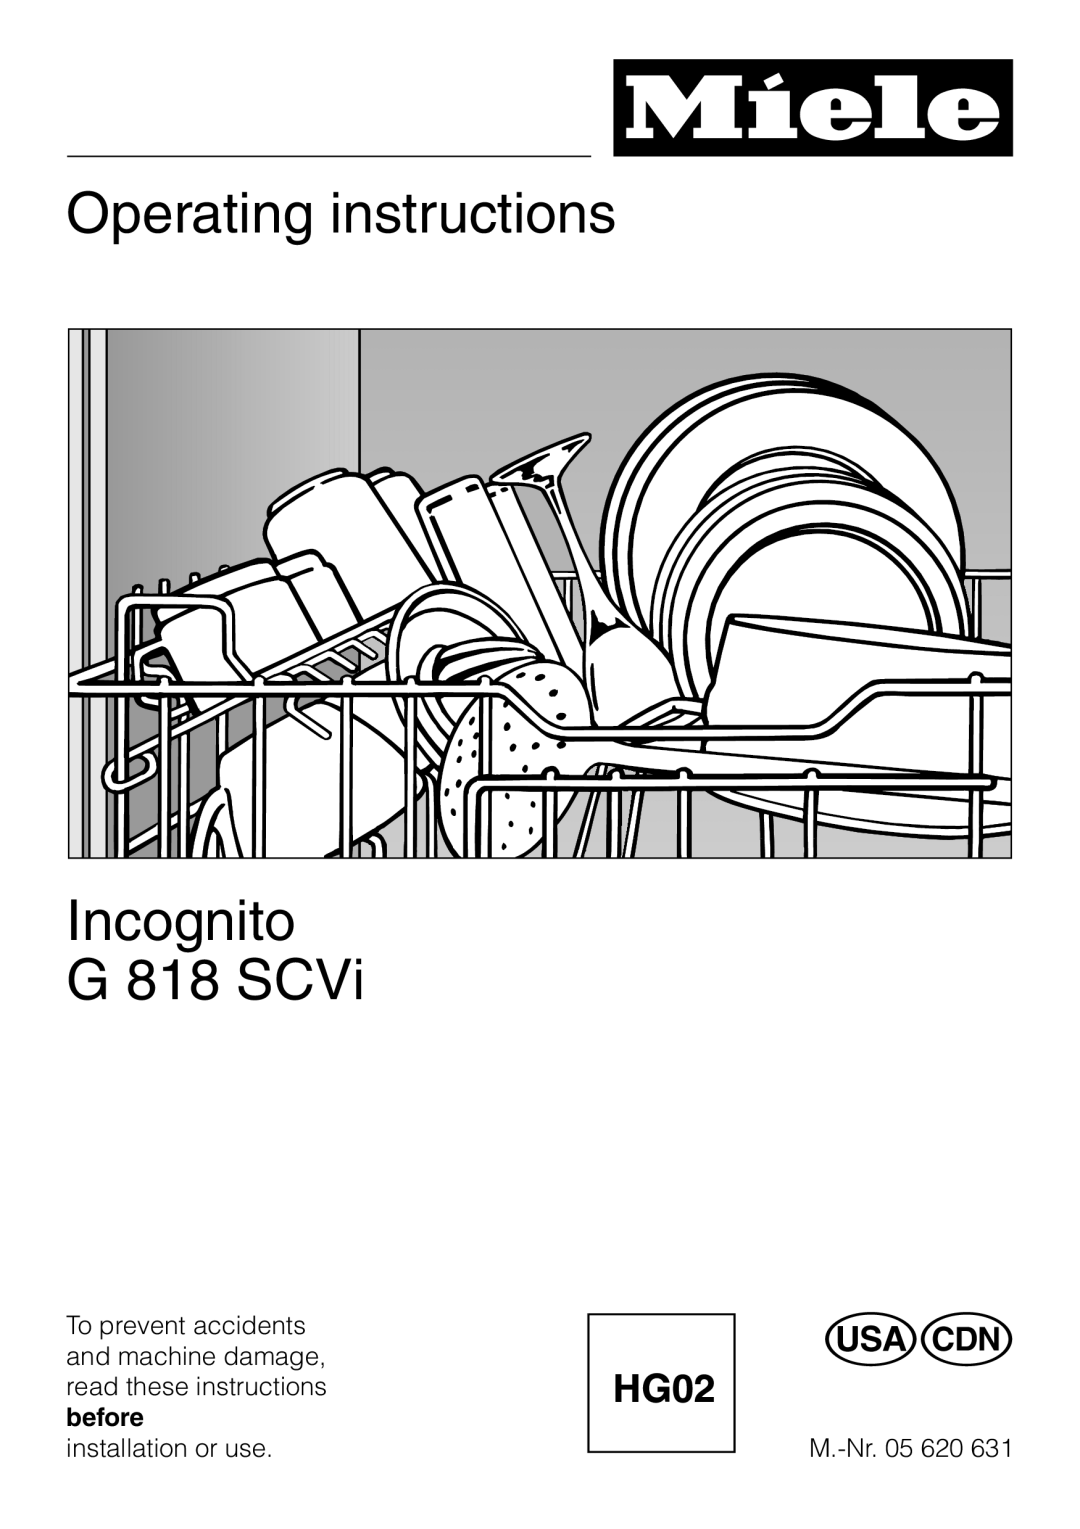 Miele G 818 SCVI operating instructions Operating instructions Incognito G 818 SCVi 